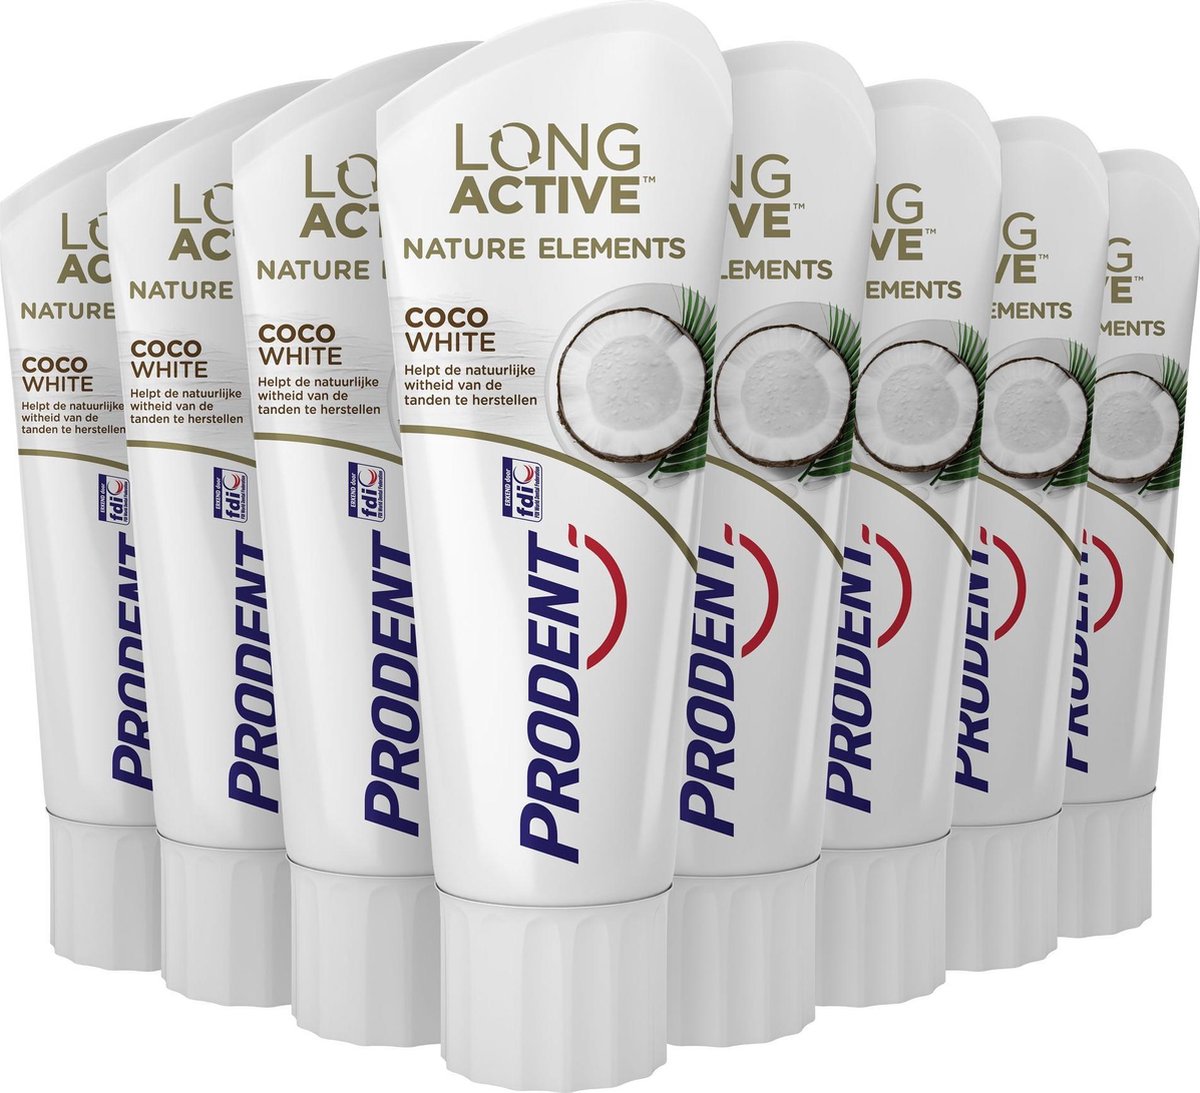 Prodent Long Active™ Nature Elements Coco White Tandpasta - 12 x 75 ml - Voordeelverpakking - Prodent